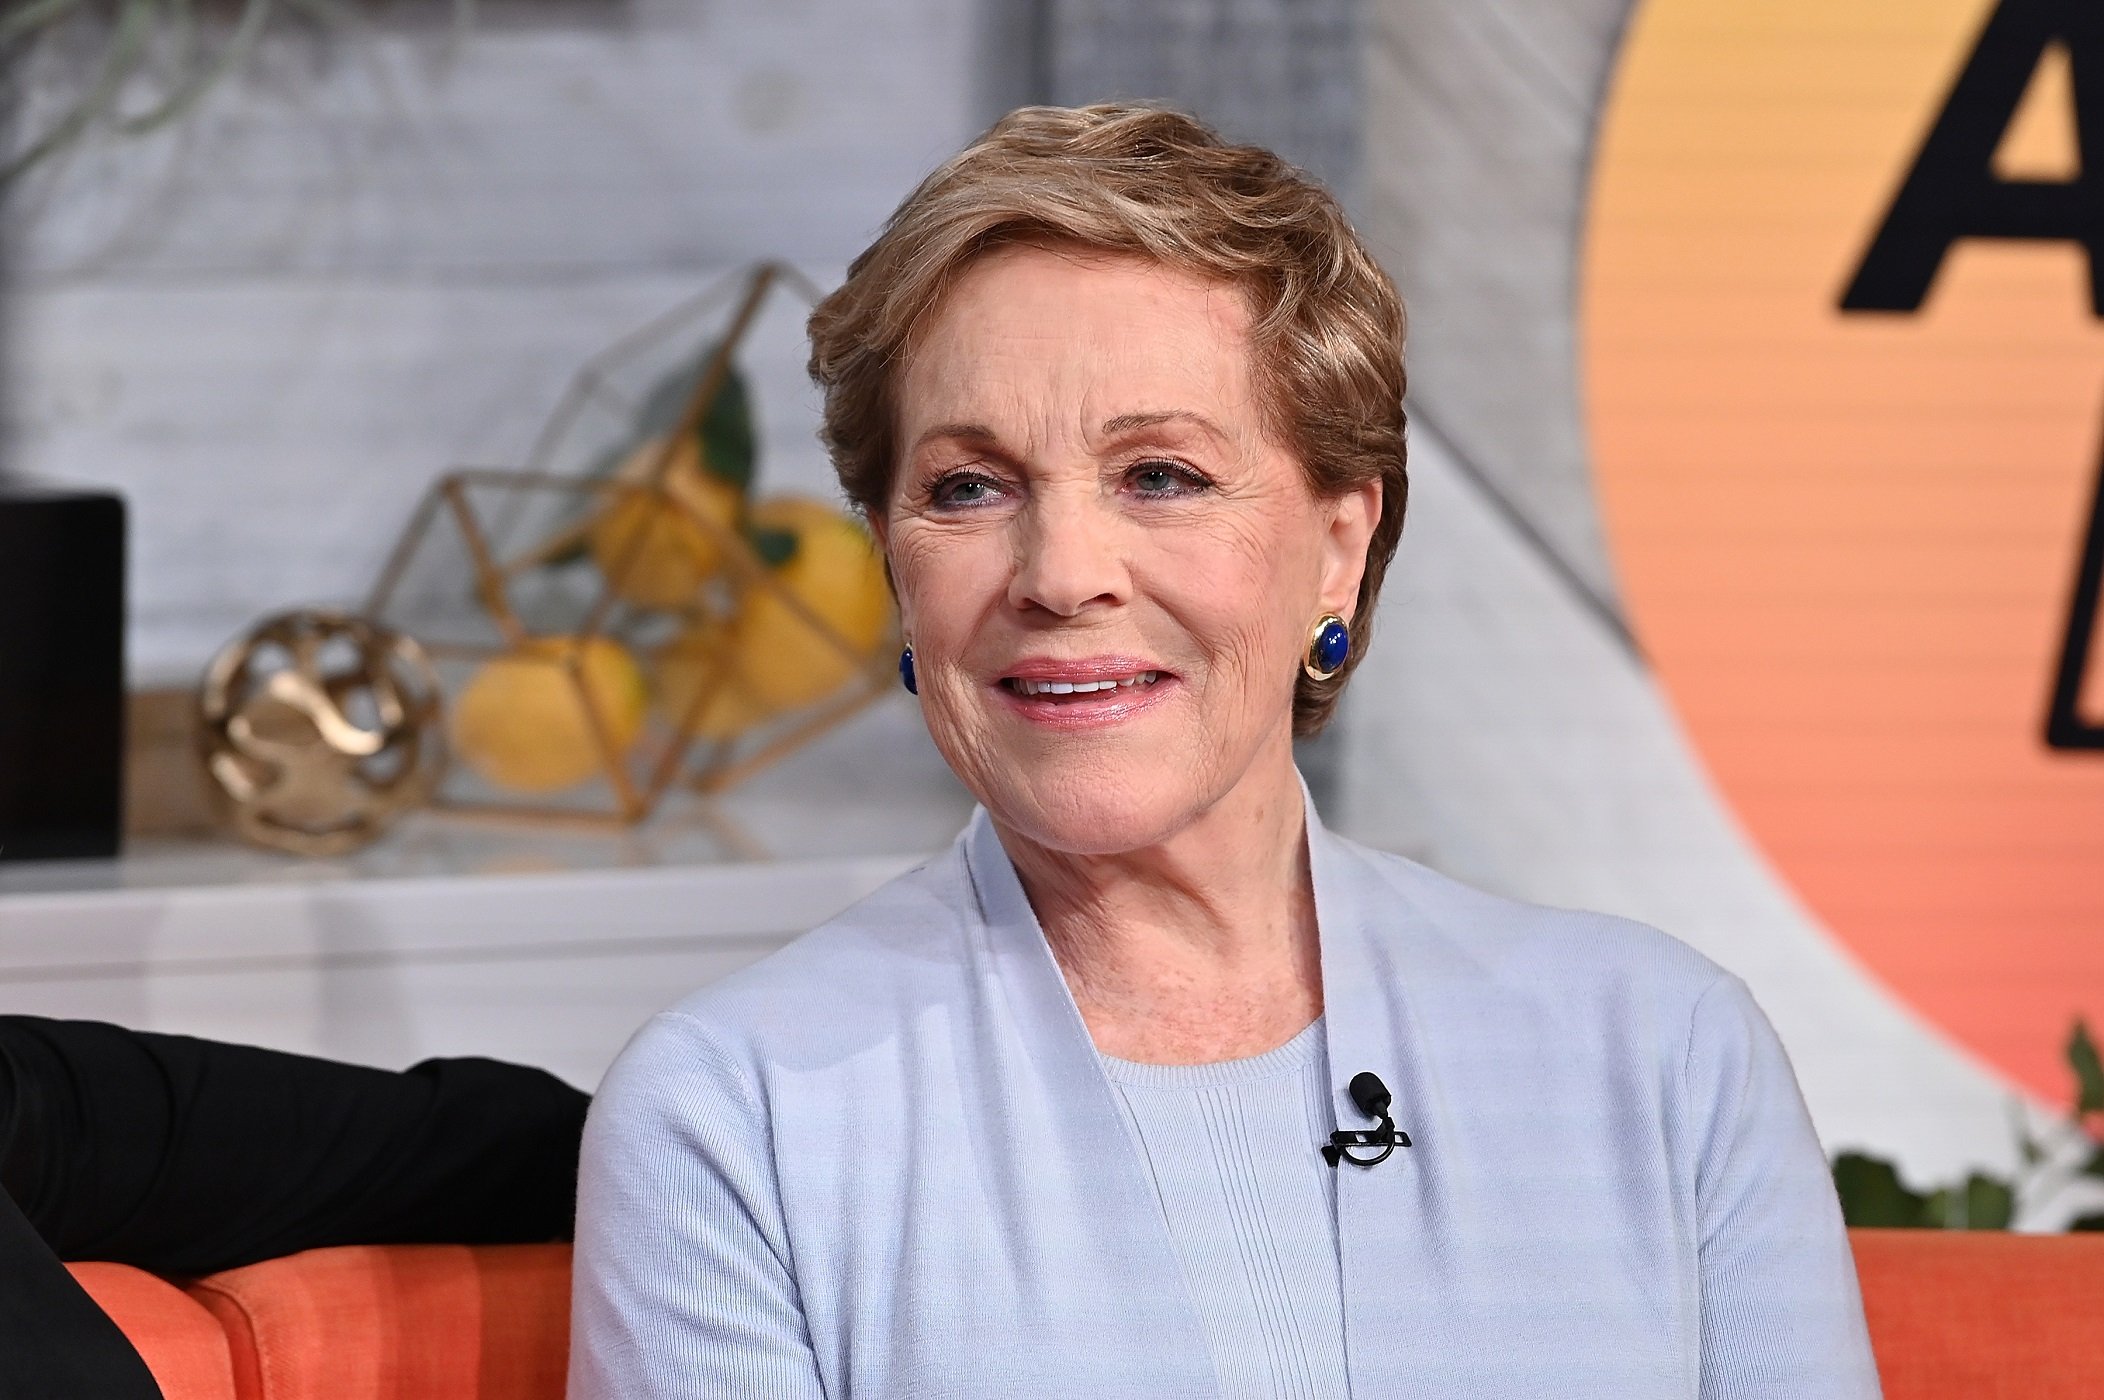 Julie Andrews visit BuzzFeed's "AM To DM" on October 15, 2019